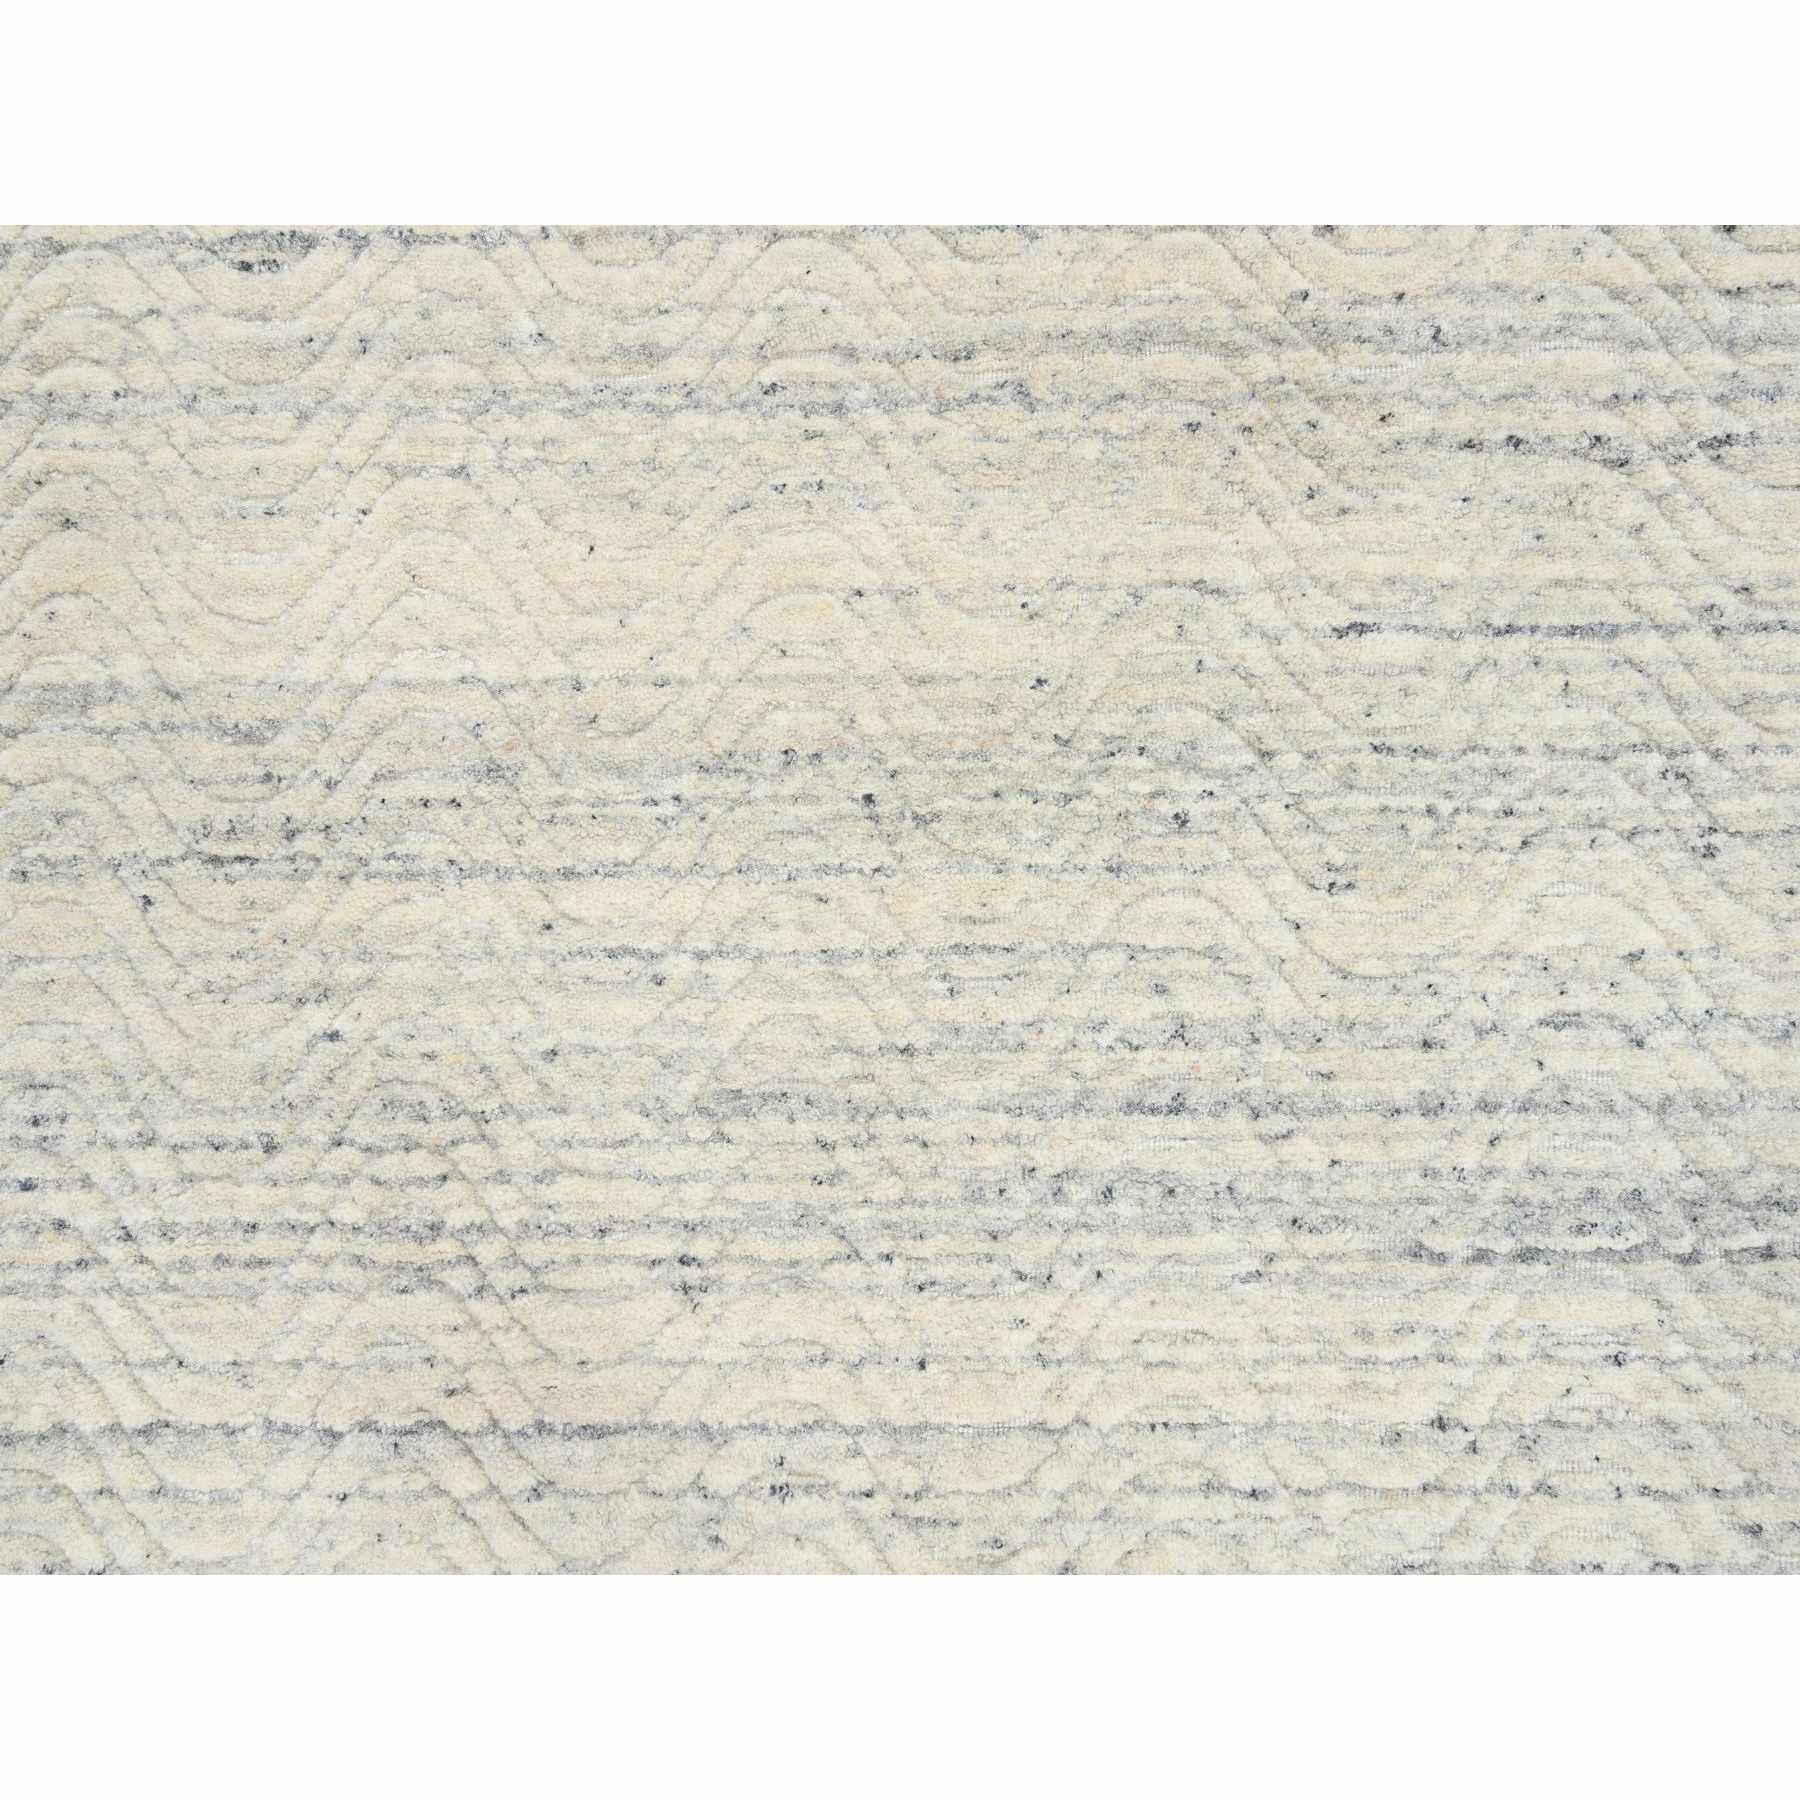 Modern-and-Contemporary-Hand-Loomed-Rug-323030